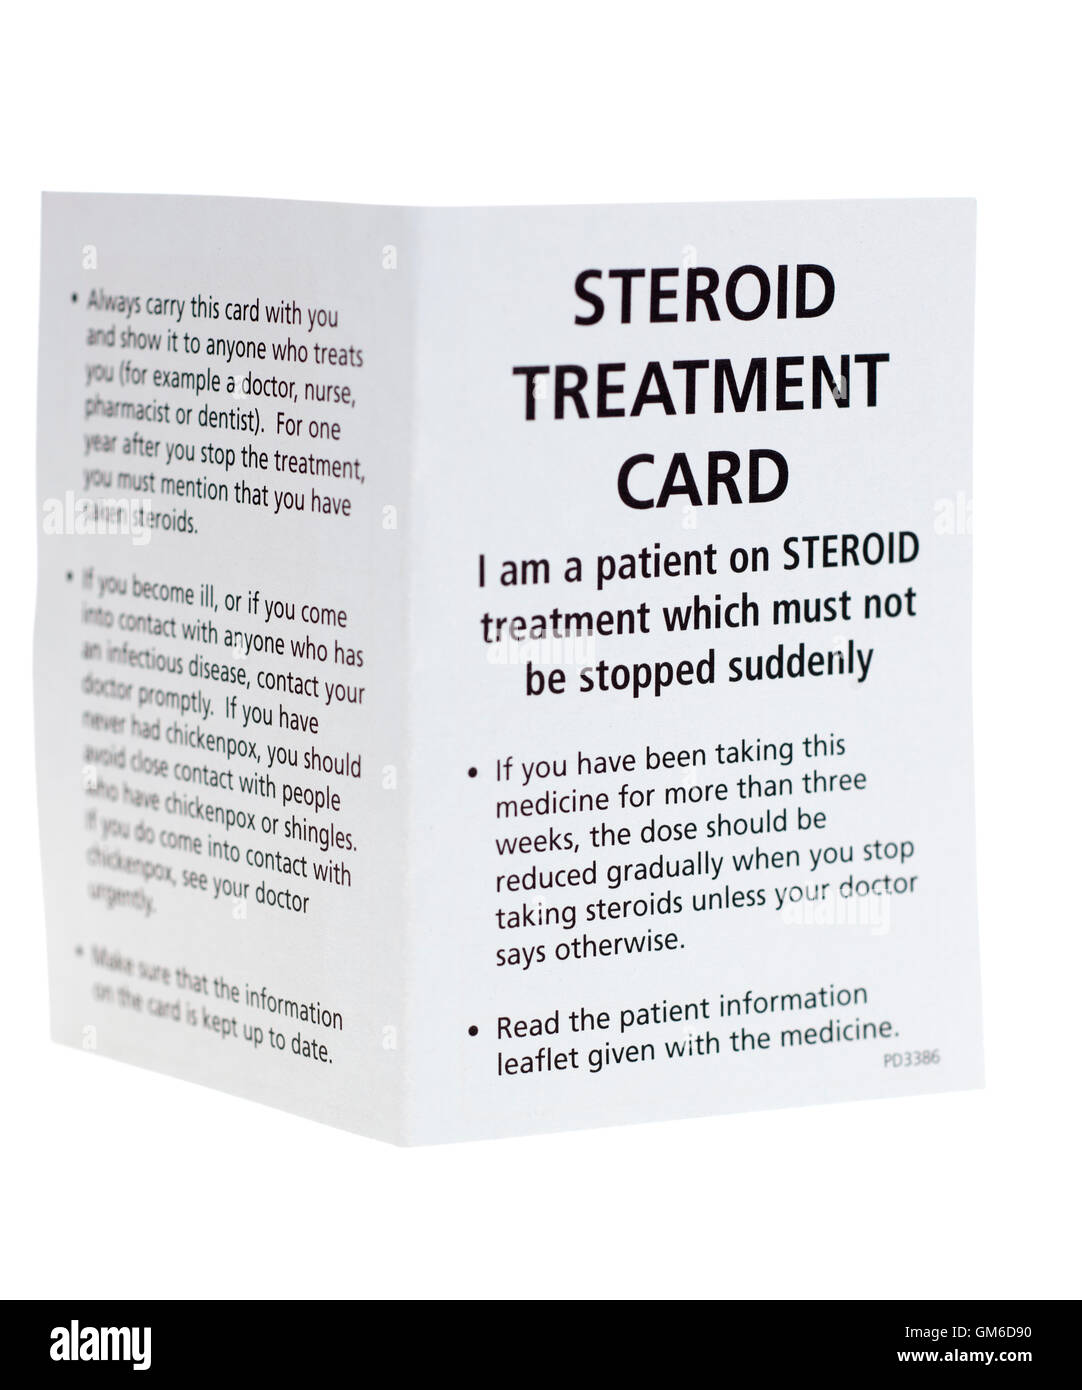 Steroid Treatment Card Stock Photo